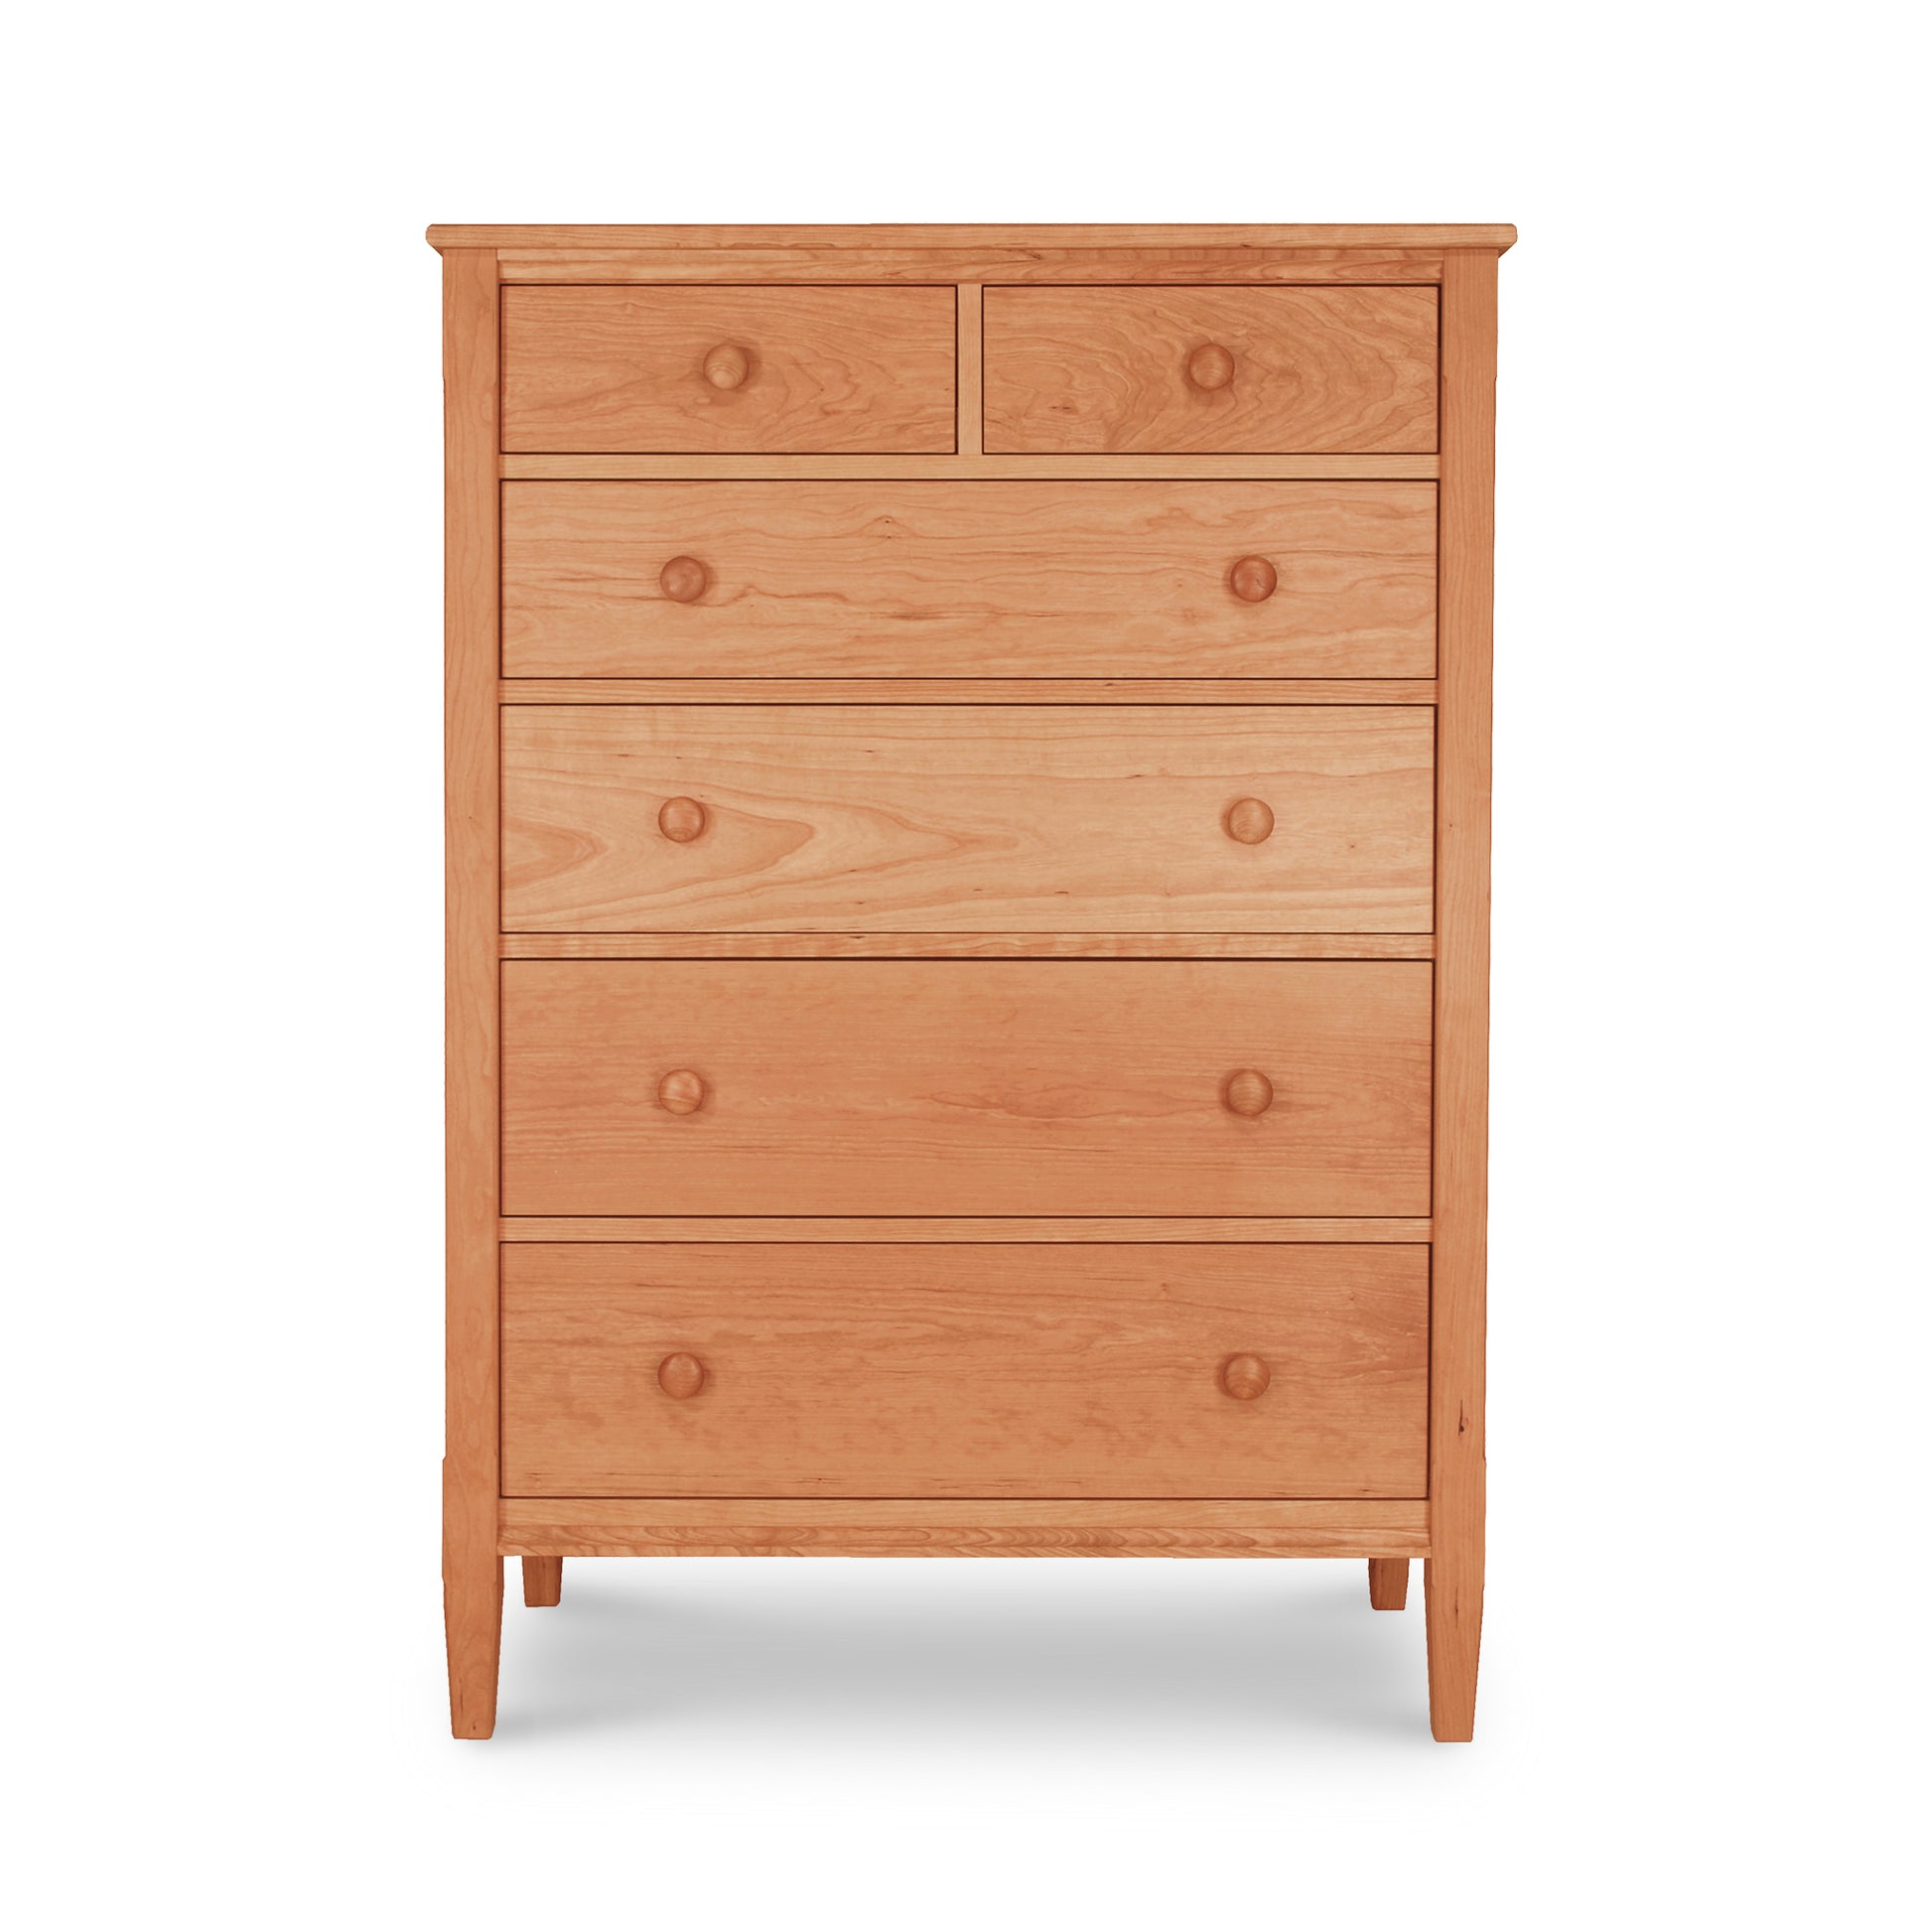 A Vermont Shaker 6-Drawer Chest by Maple Corner Woodworks with a simple design, featuring round knobs on each drawer, isolated on a white background, ideal for bedroom storage.